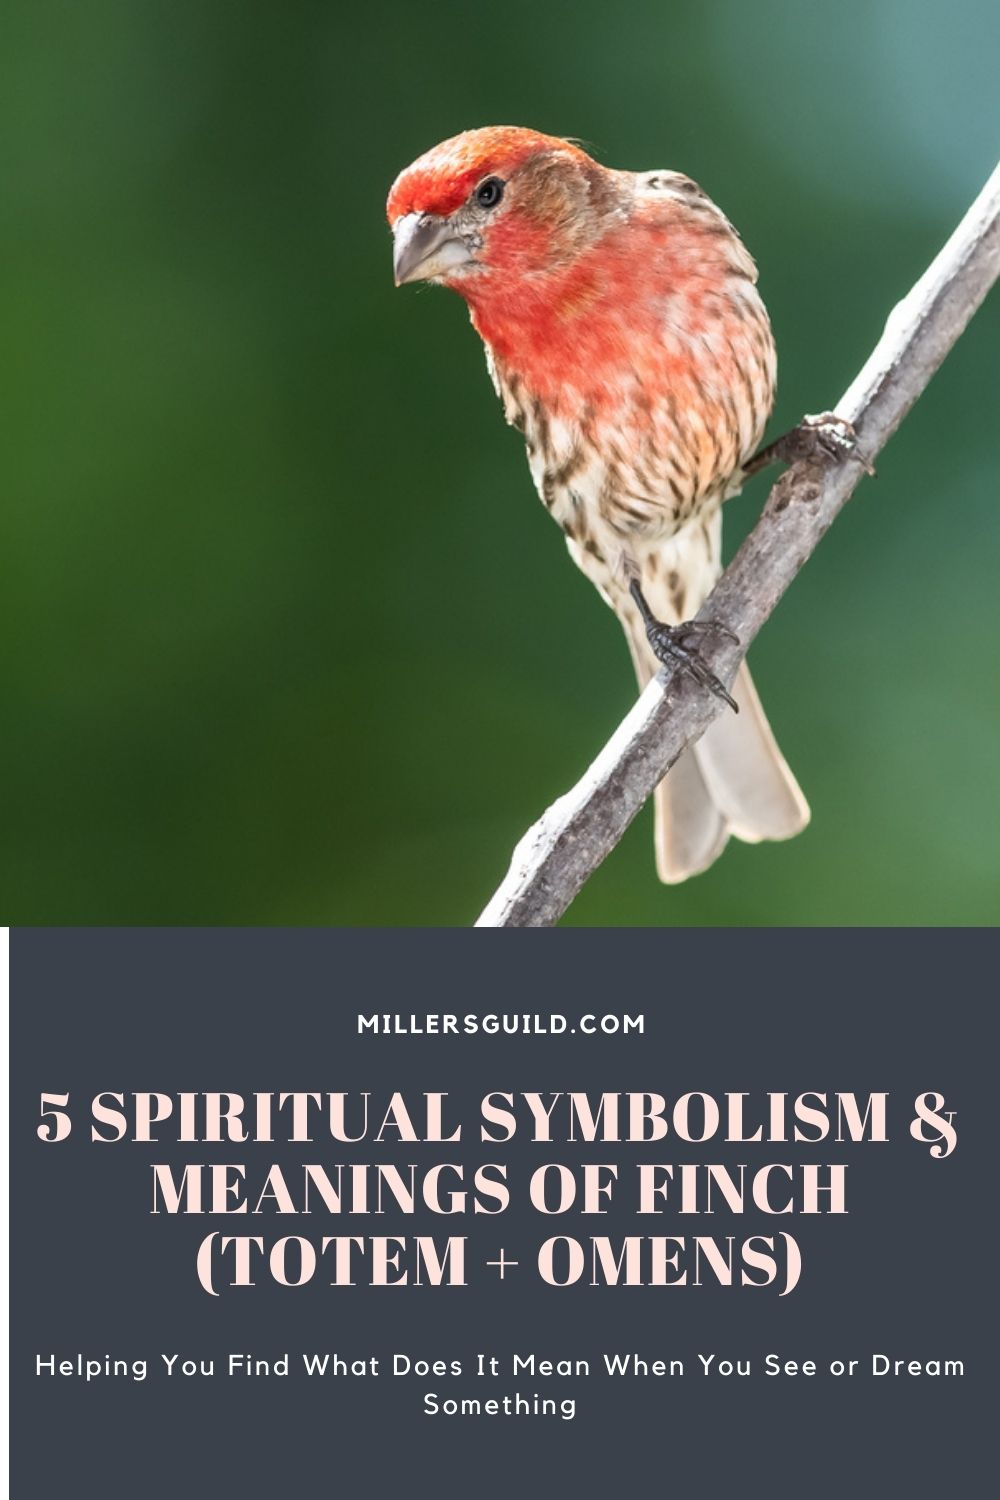 5 Spiritual Symbolism & Meanings of Finch (Totem + Omens) 3